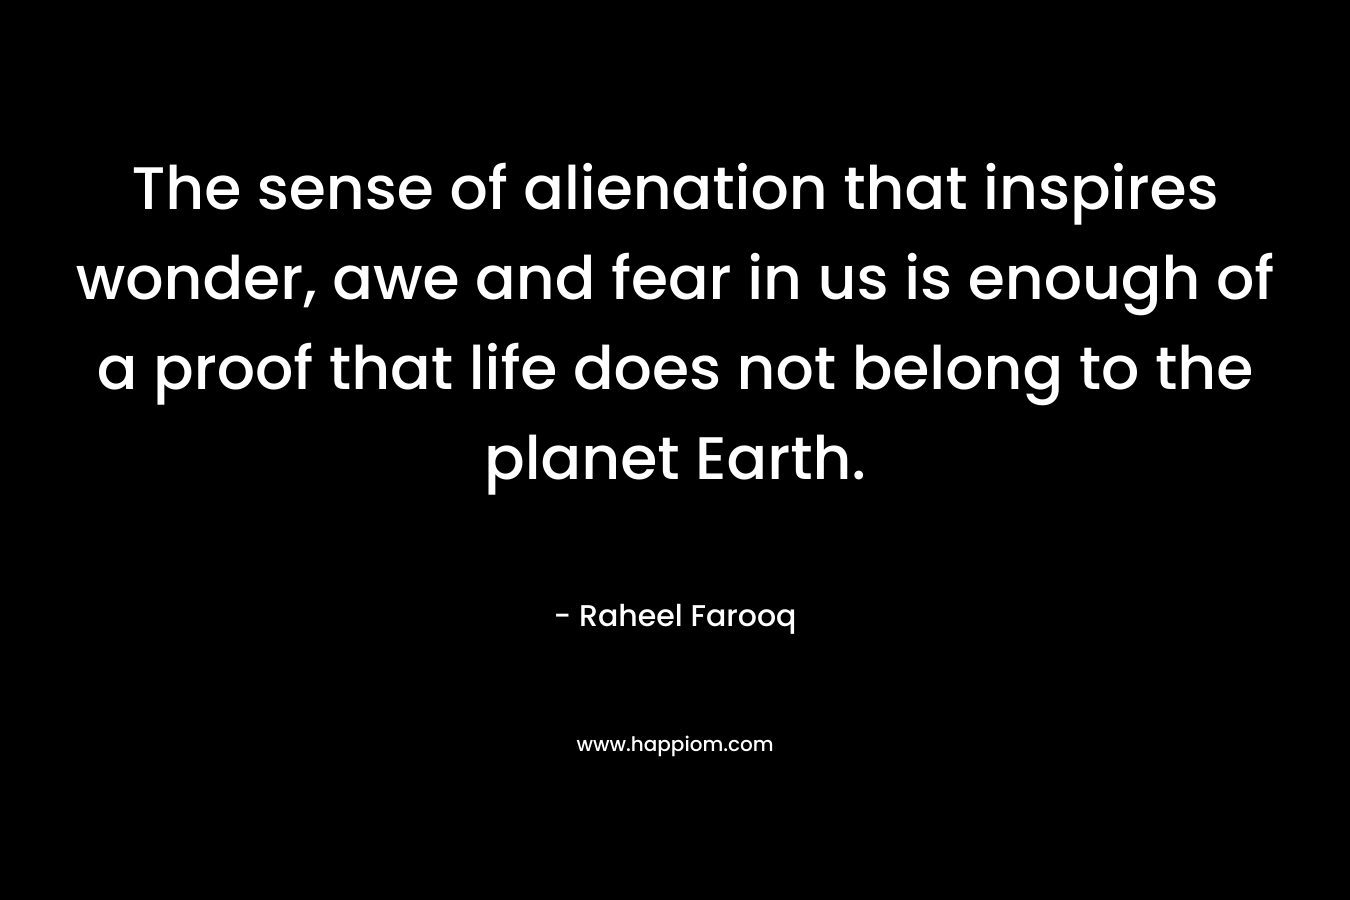 The sense of alienation that inspires wonder, awe and fear in us is enough of a proof that life does not belong to the planet Earth. – Raheel Farooq